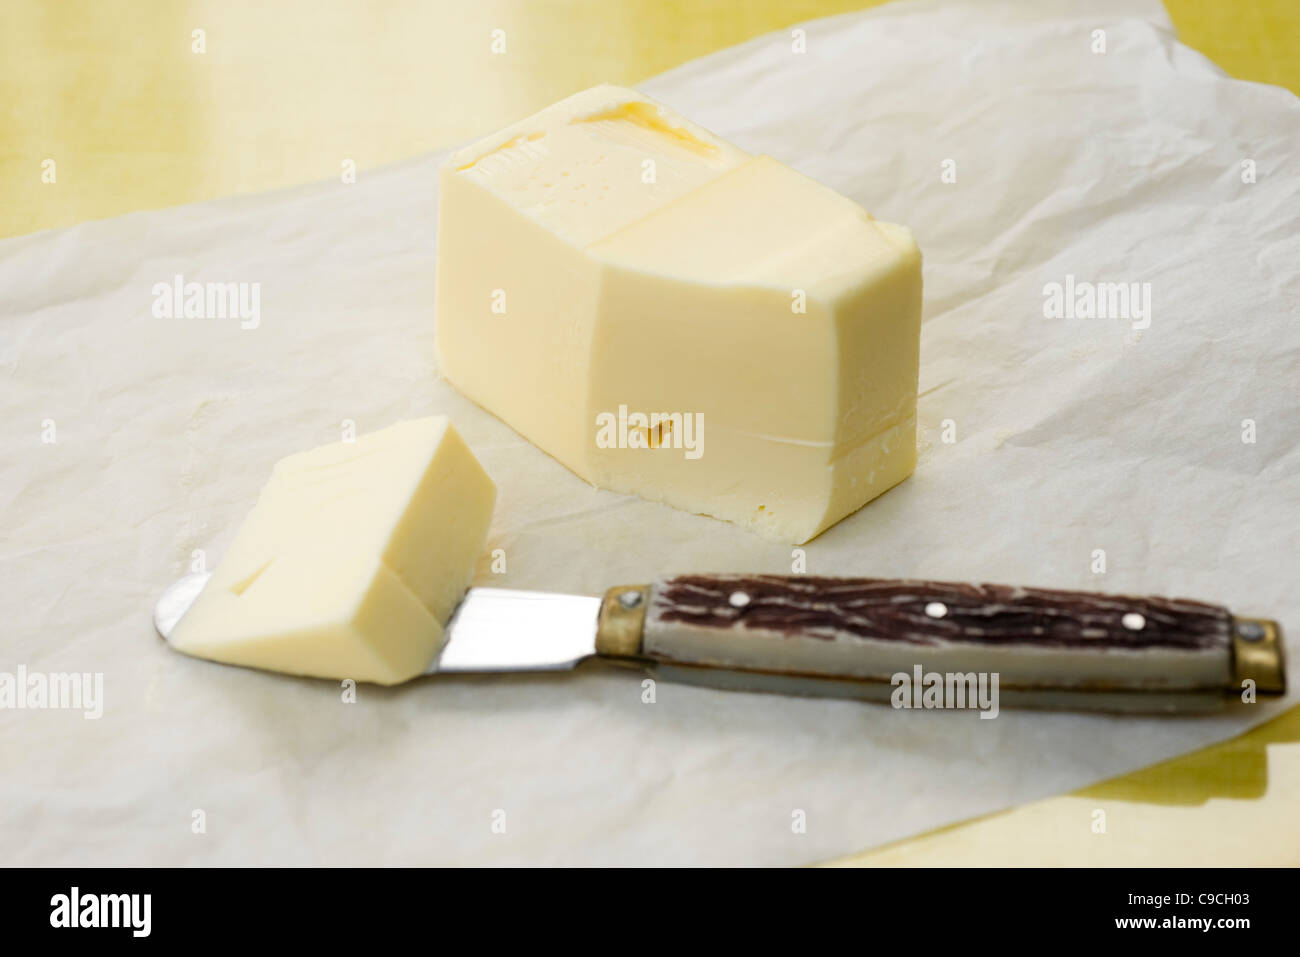 Cutting butter Stock Photo